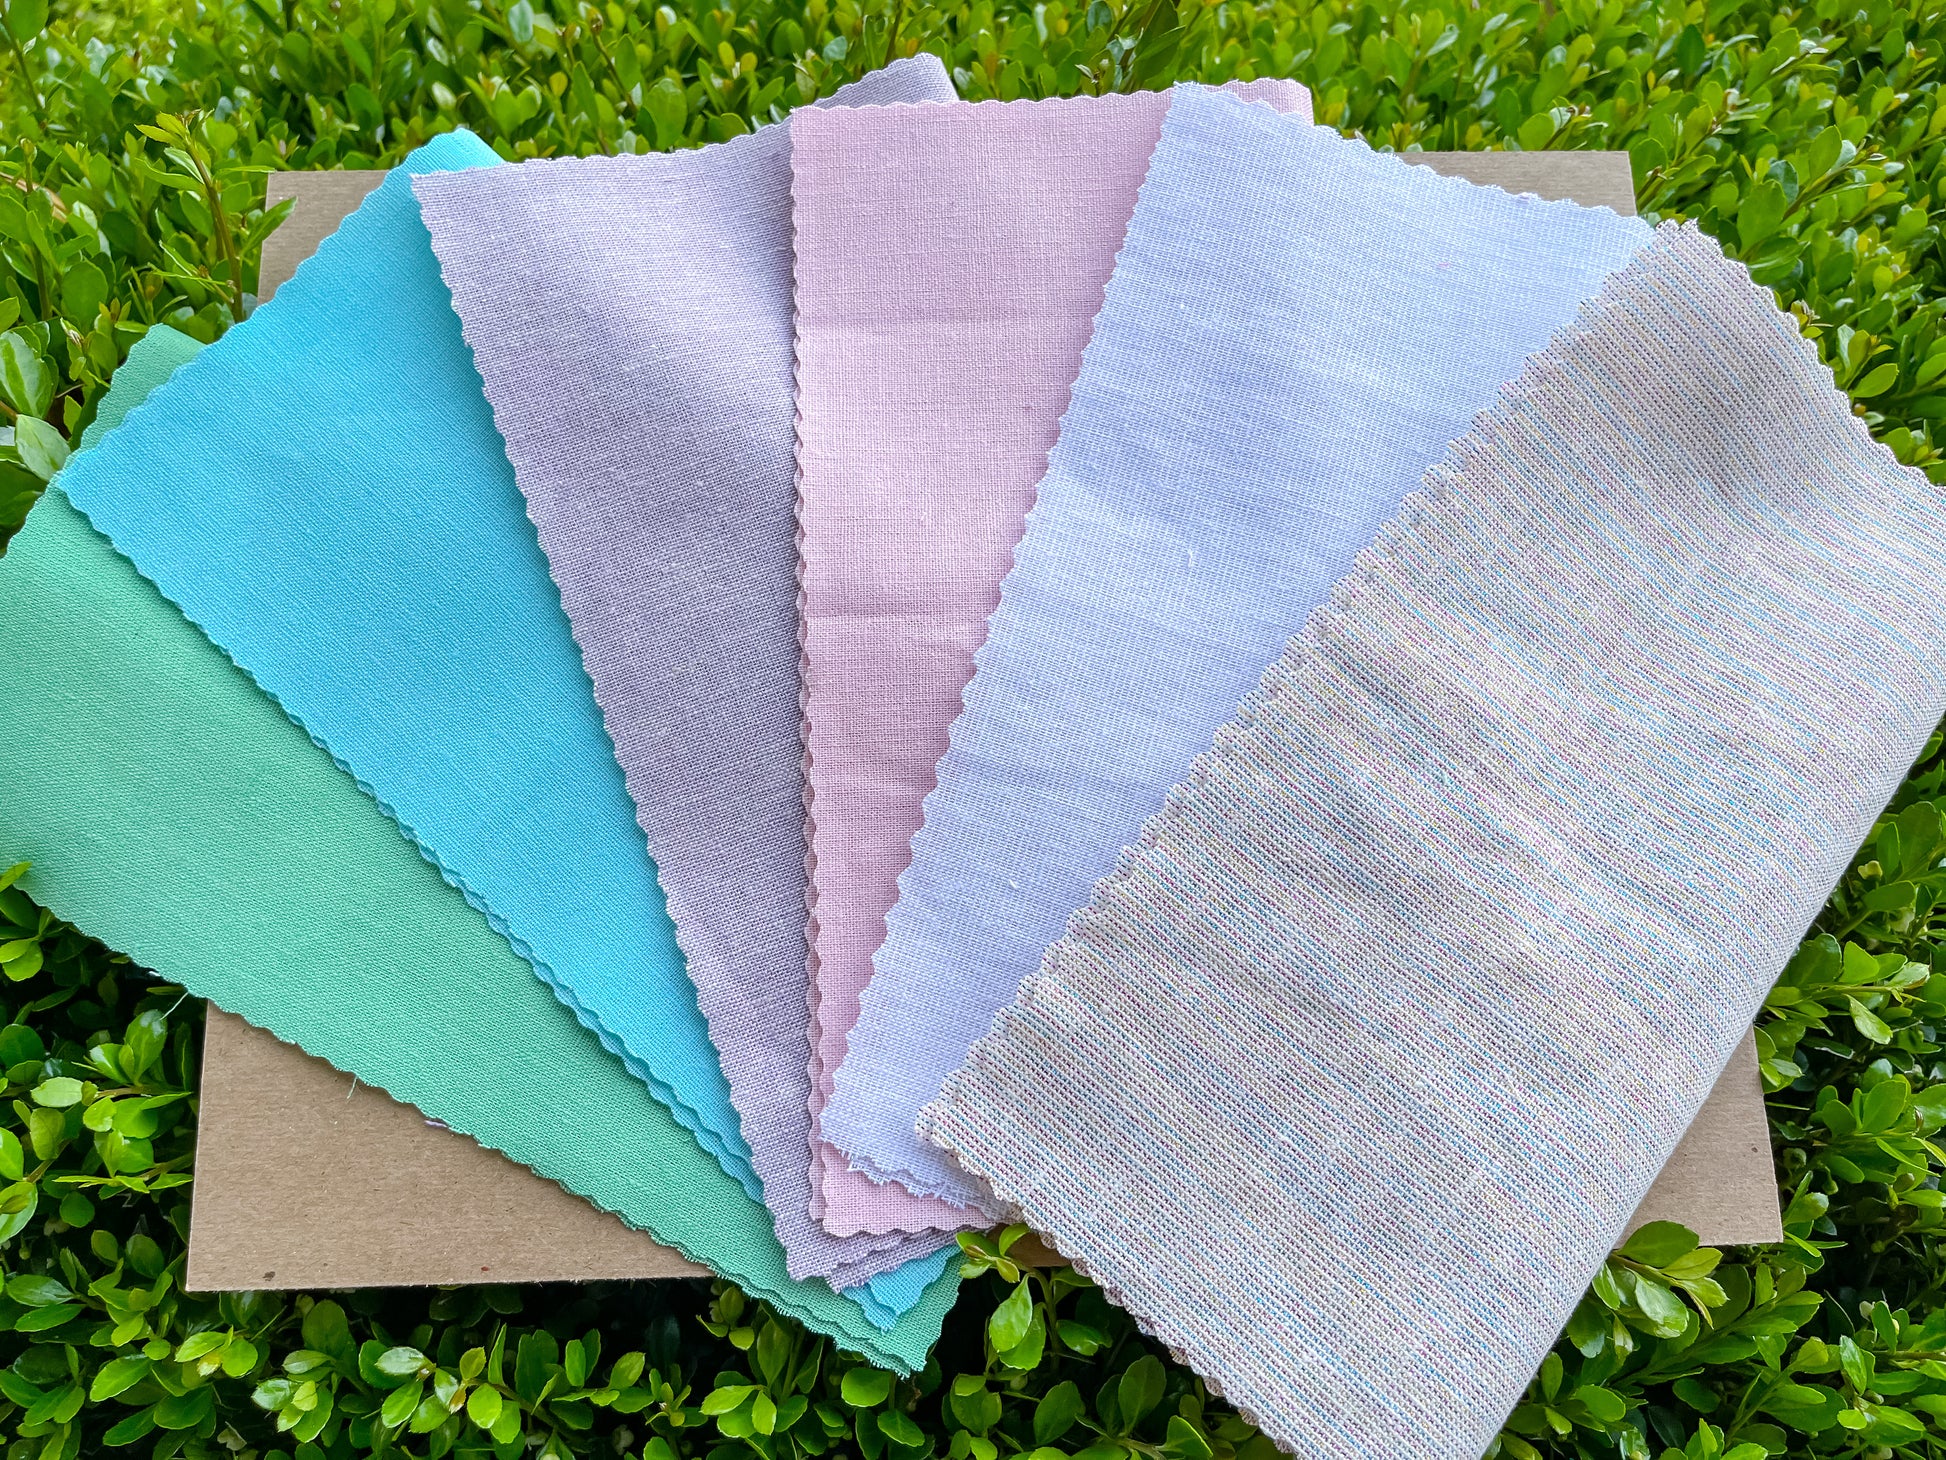 12 Pcs/Set Embroidery Fabric, Linen Fabric for Embroidery Linen Embroidery  Fabric Squares Embroidery Needlework Cloth Fabric with 100 Skeins